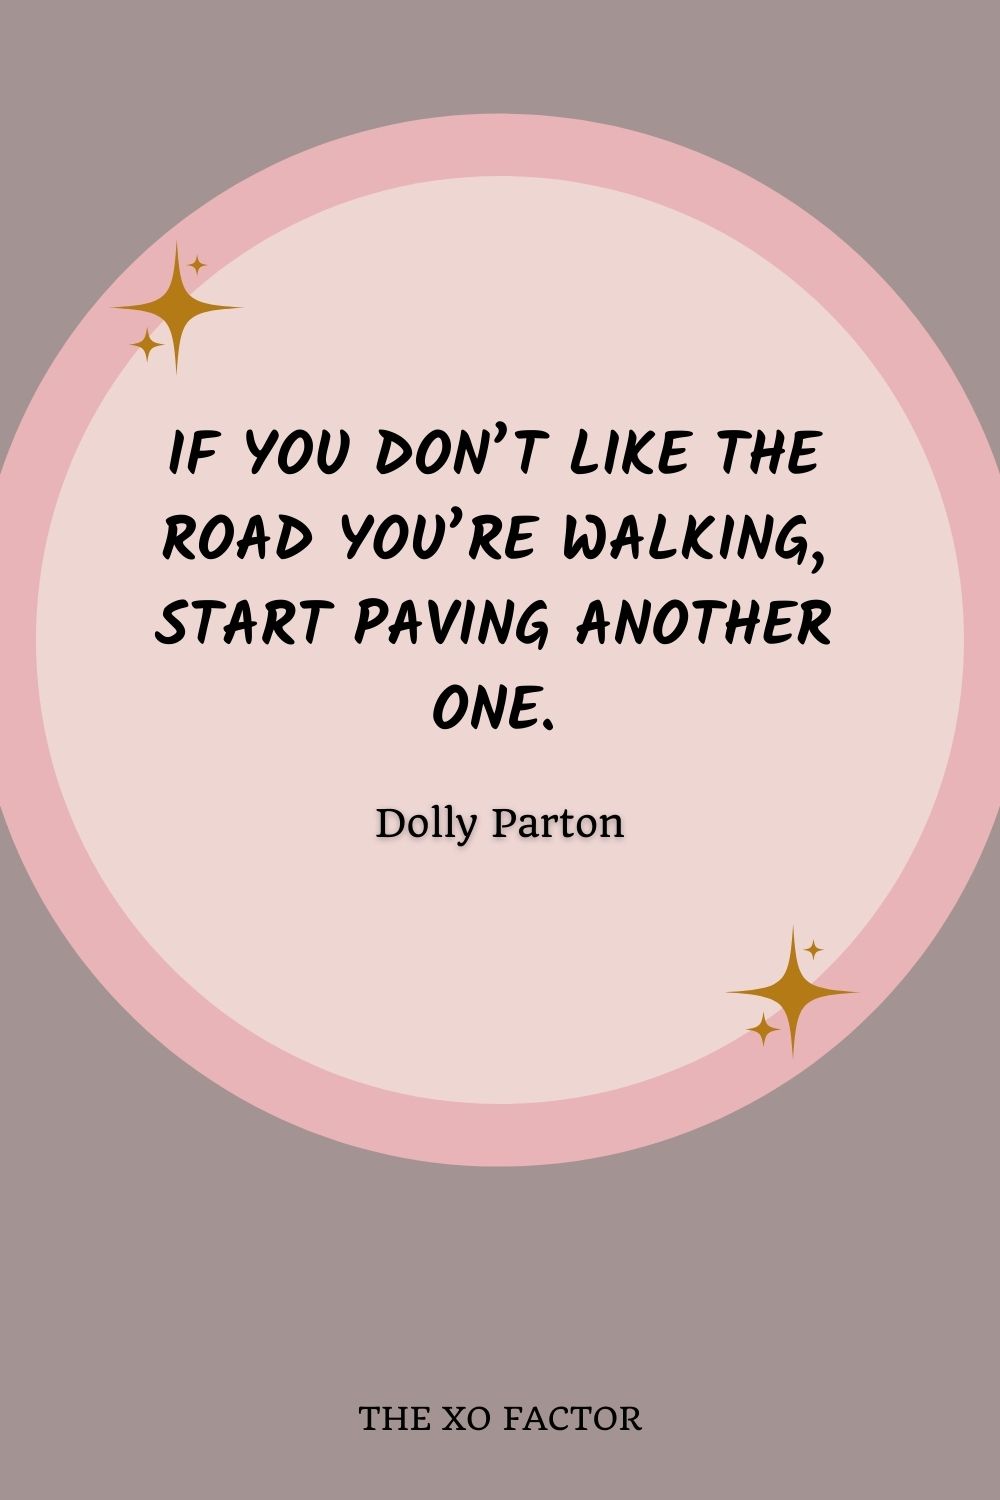 If you don’t like the road you’re walking, start paving another one.” – Dolly Parton